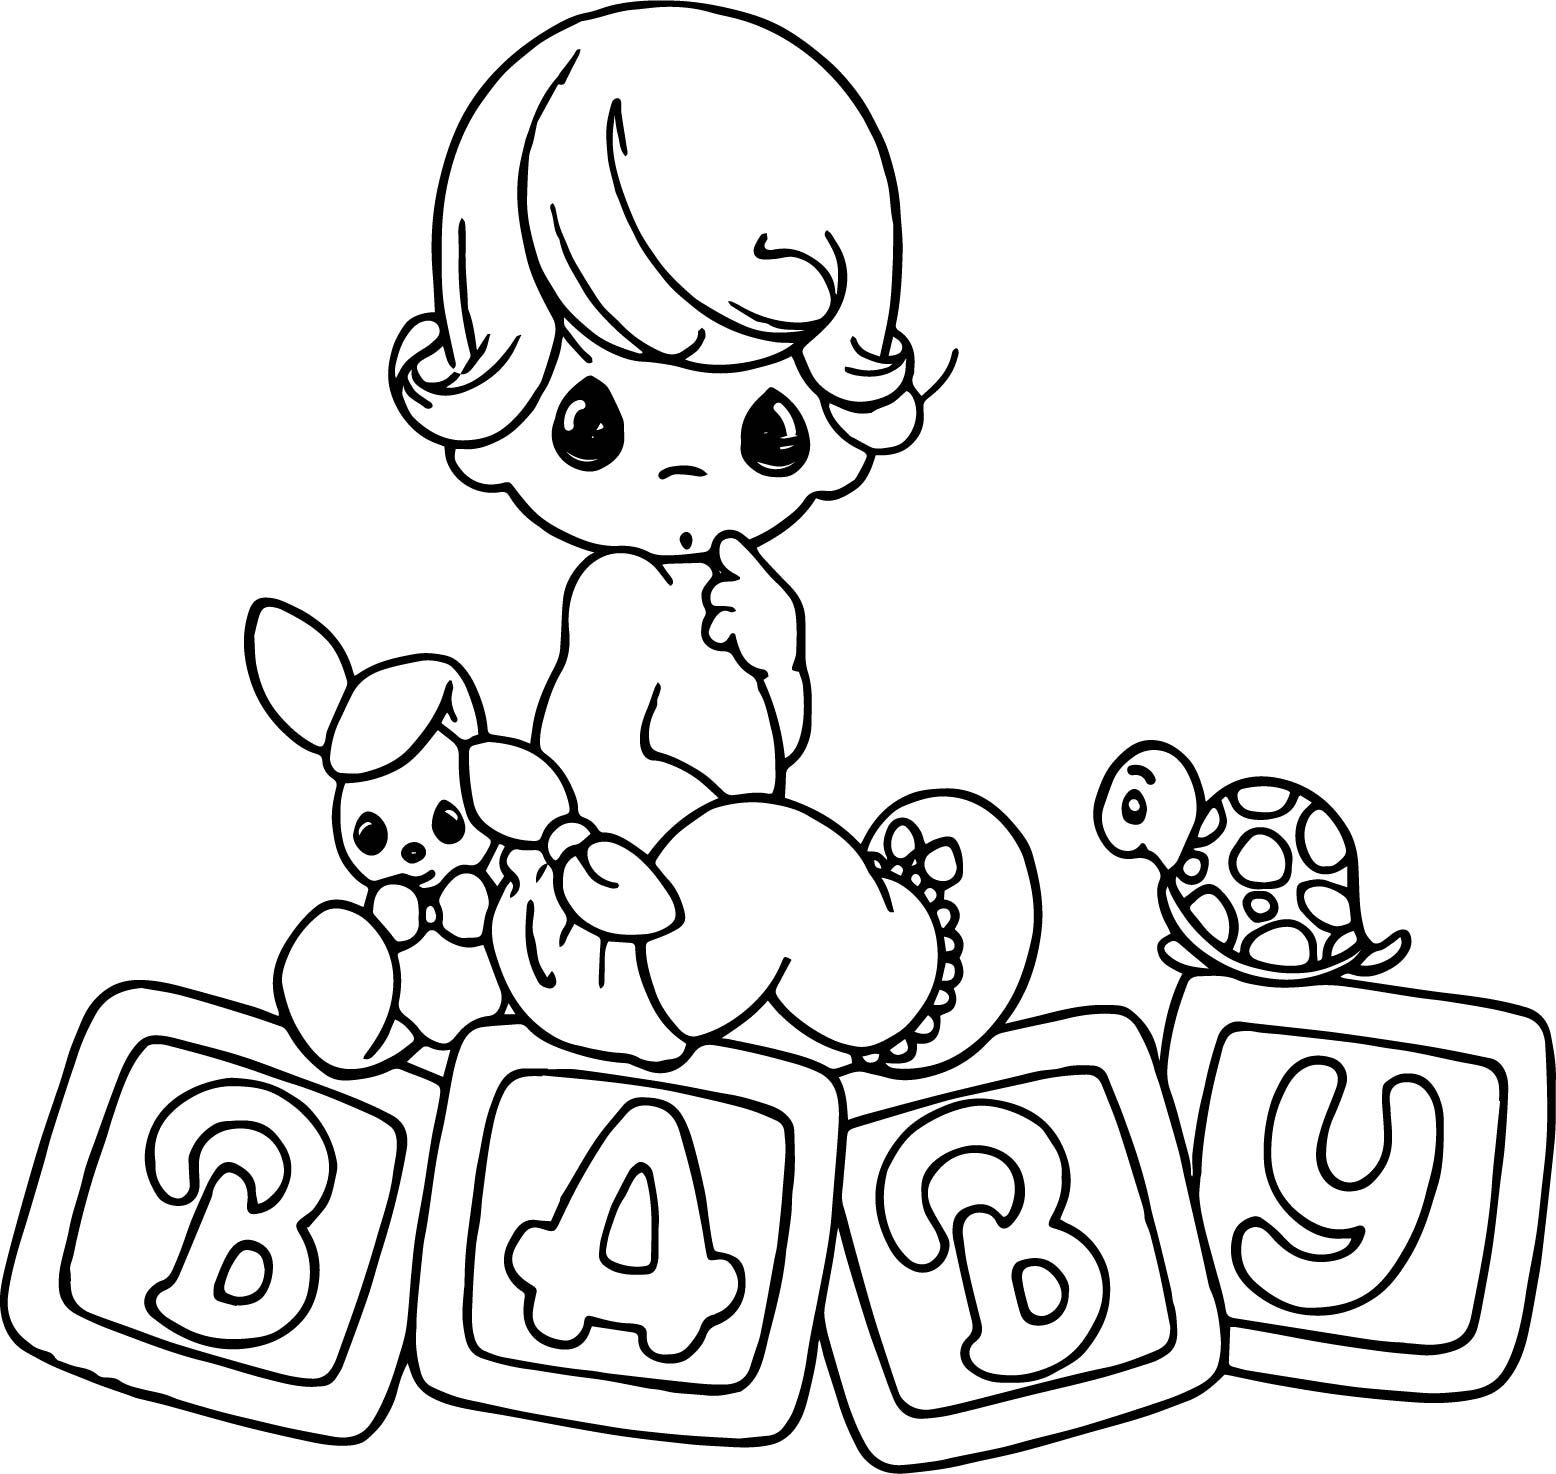 Baby Pictures Coloring Pages Pdf - Baby Pictures Coloring Pages